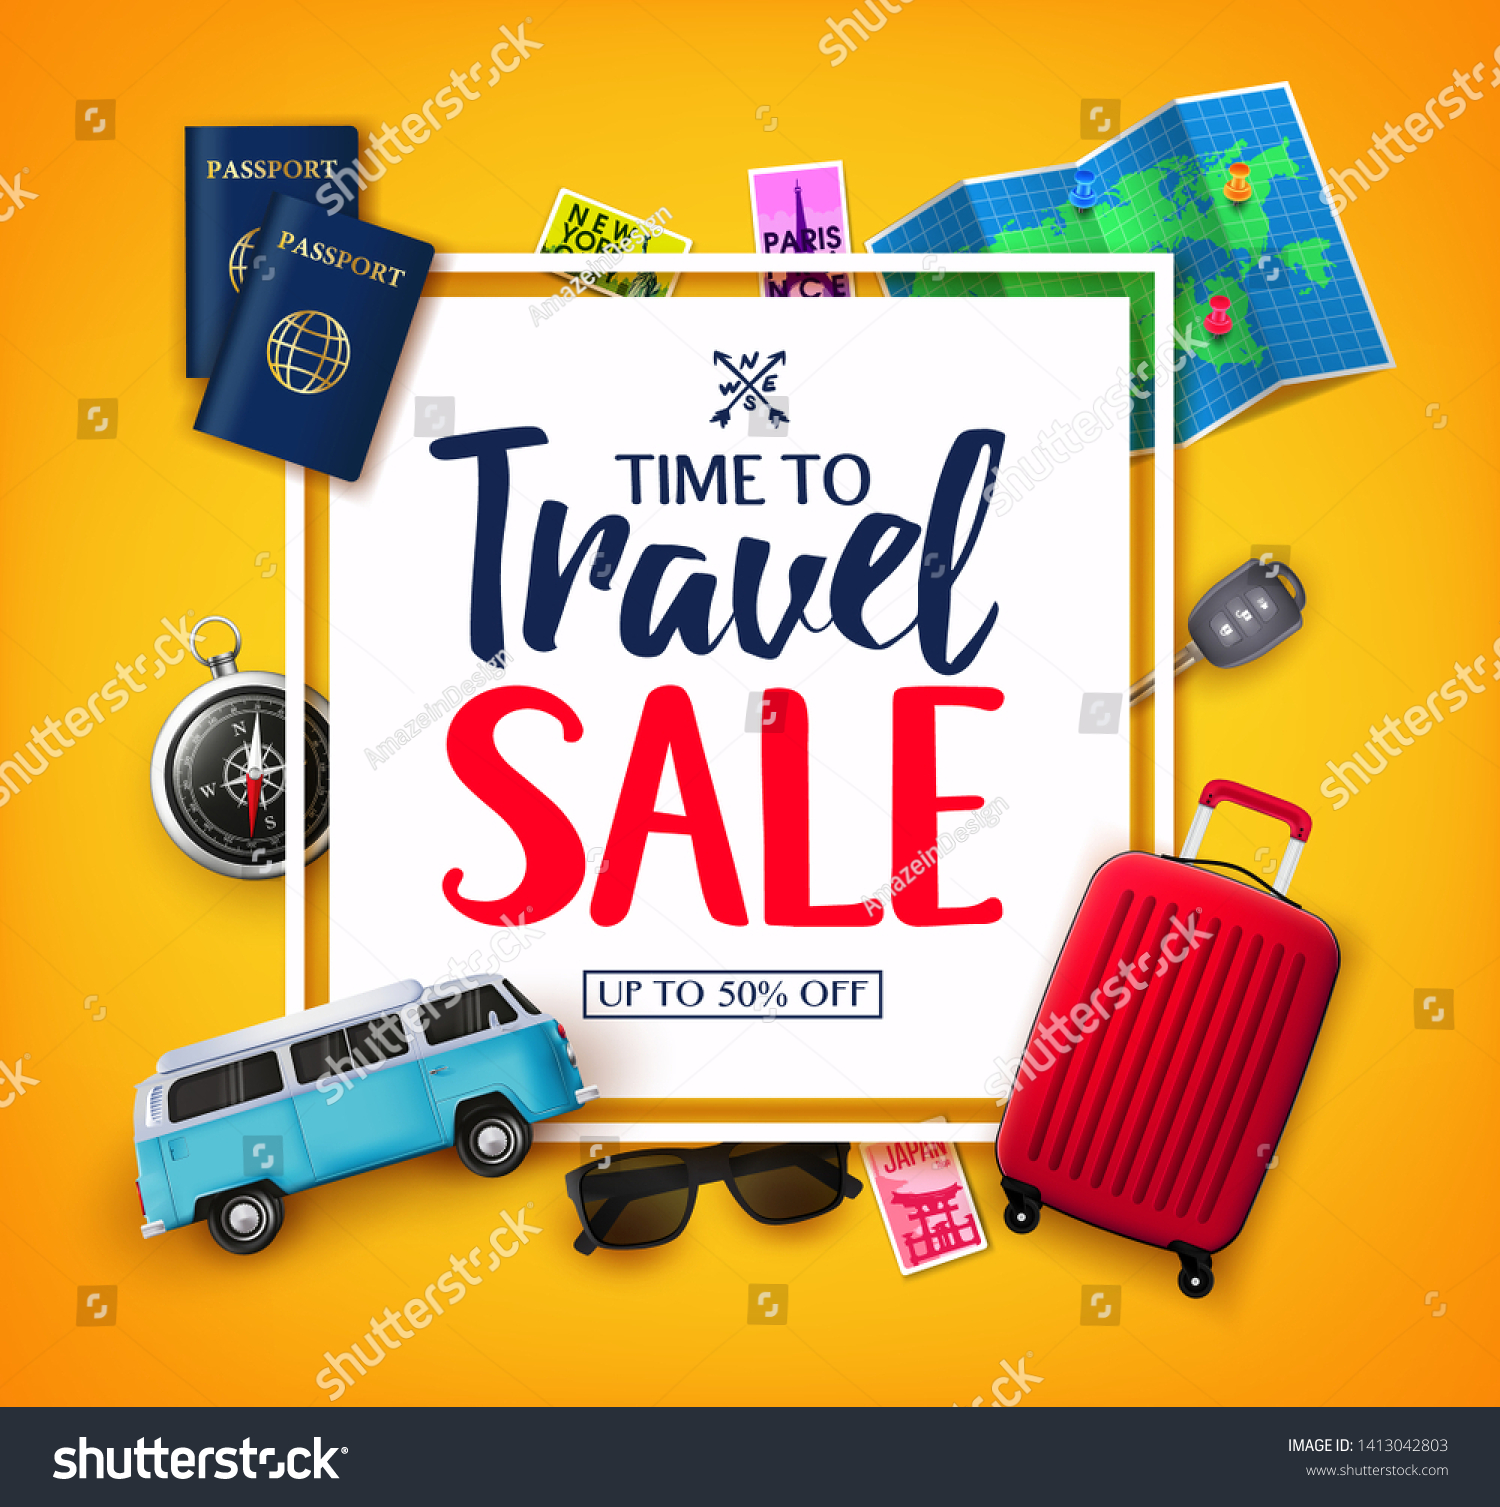 SVG of Time To Travel Ads Banner Up To 50% Off  in White Space for Text with Vector 3D Realistic Traveling Item Elements in Yellow Background. For Promotional Purposes svg